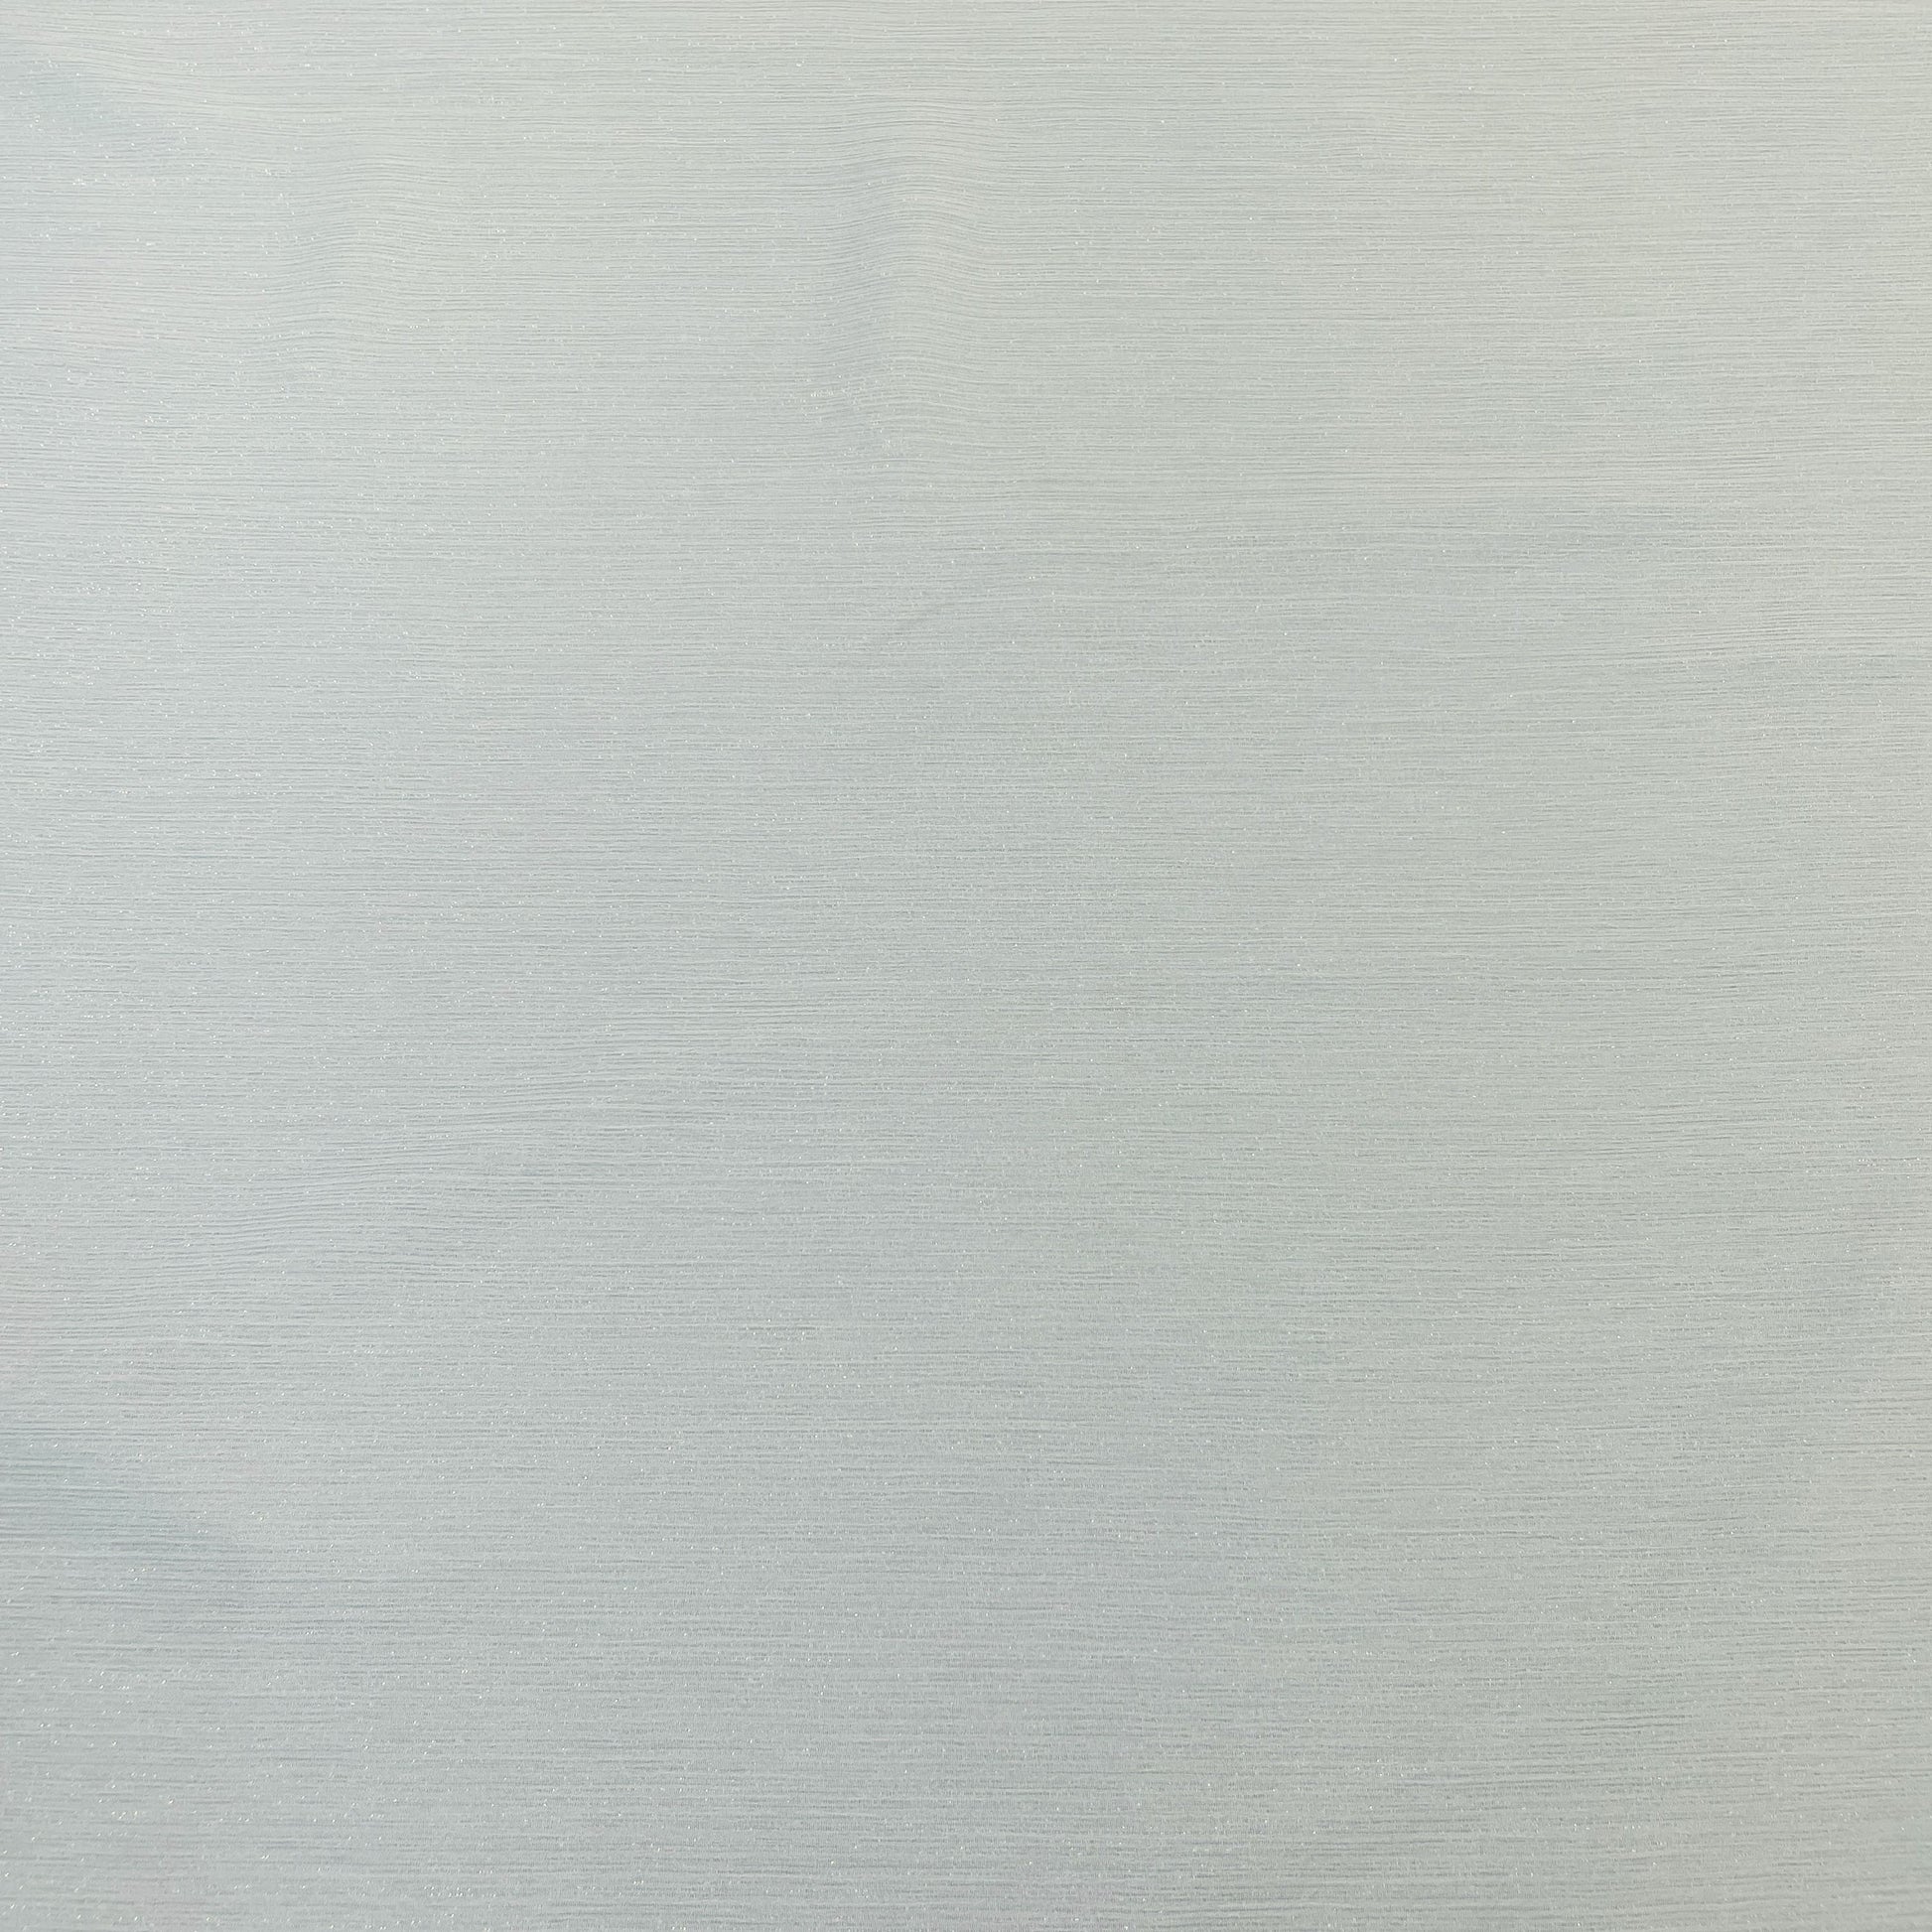 Exclusive Sky Blue Solid Shimmer Chiffon Fabric